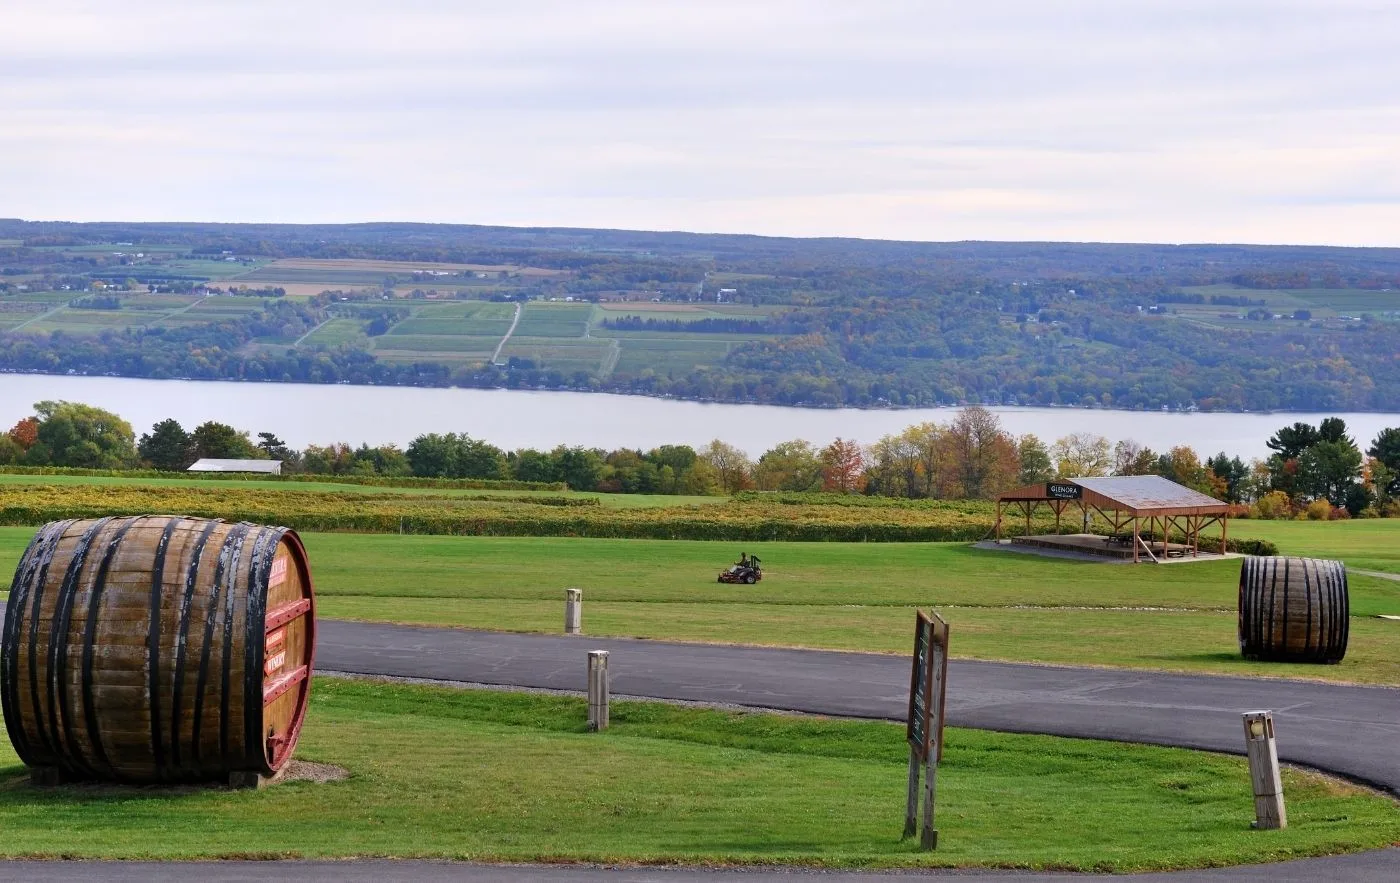 Wine vineyard overlooking a lake in the Finger Lakes region of New York.  